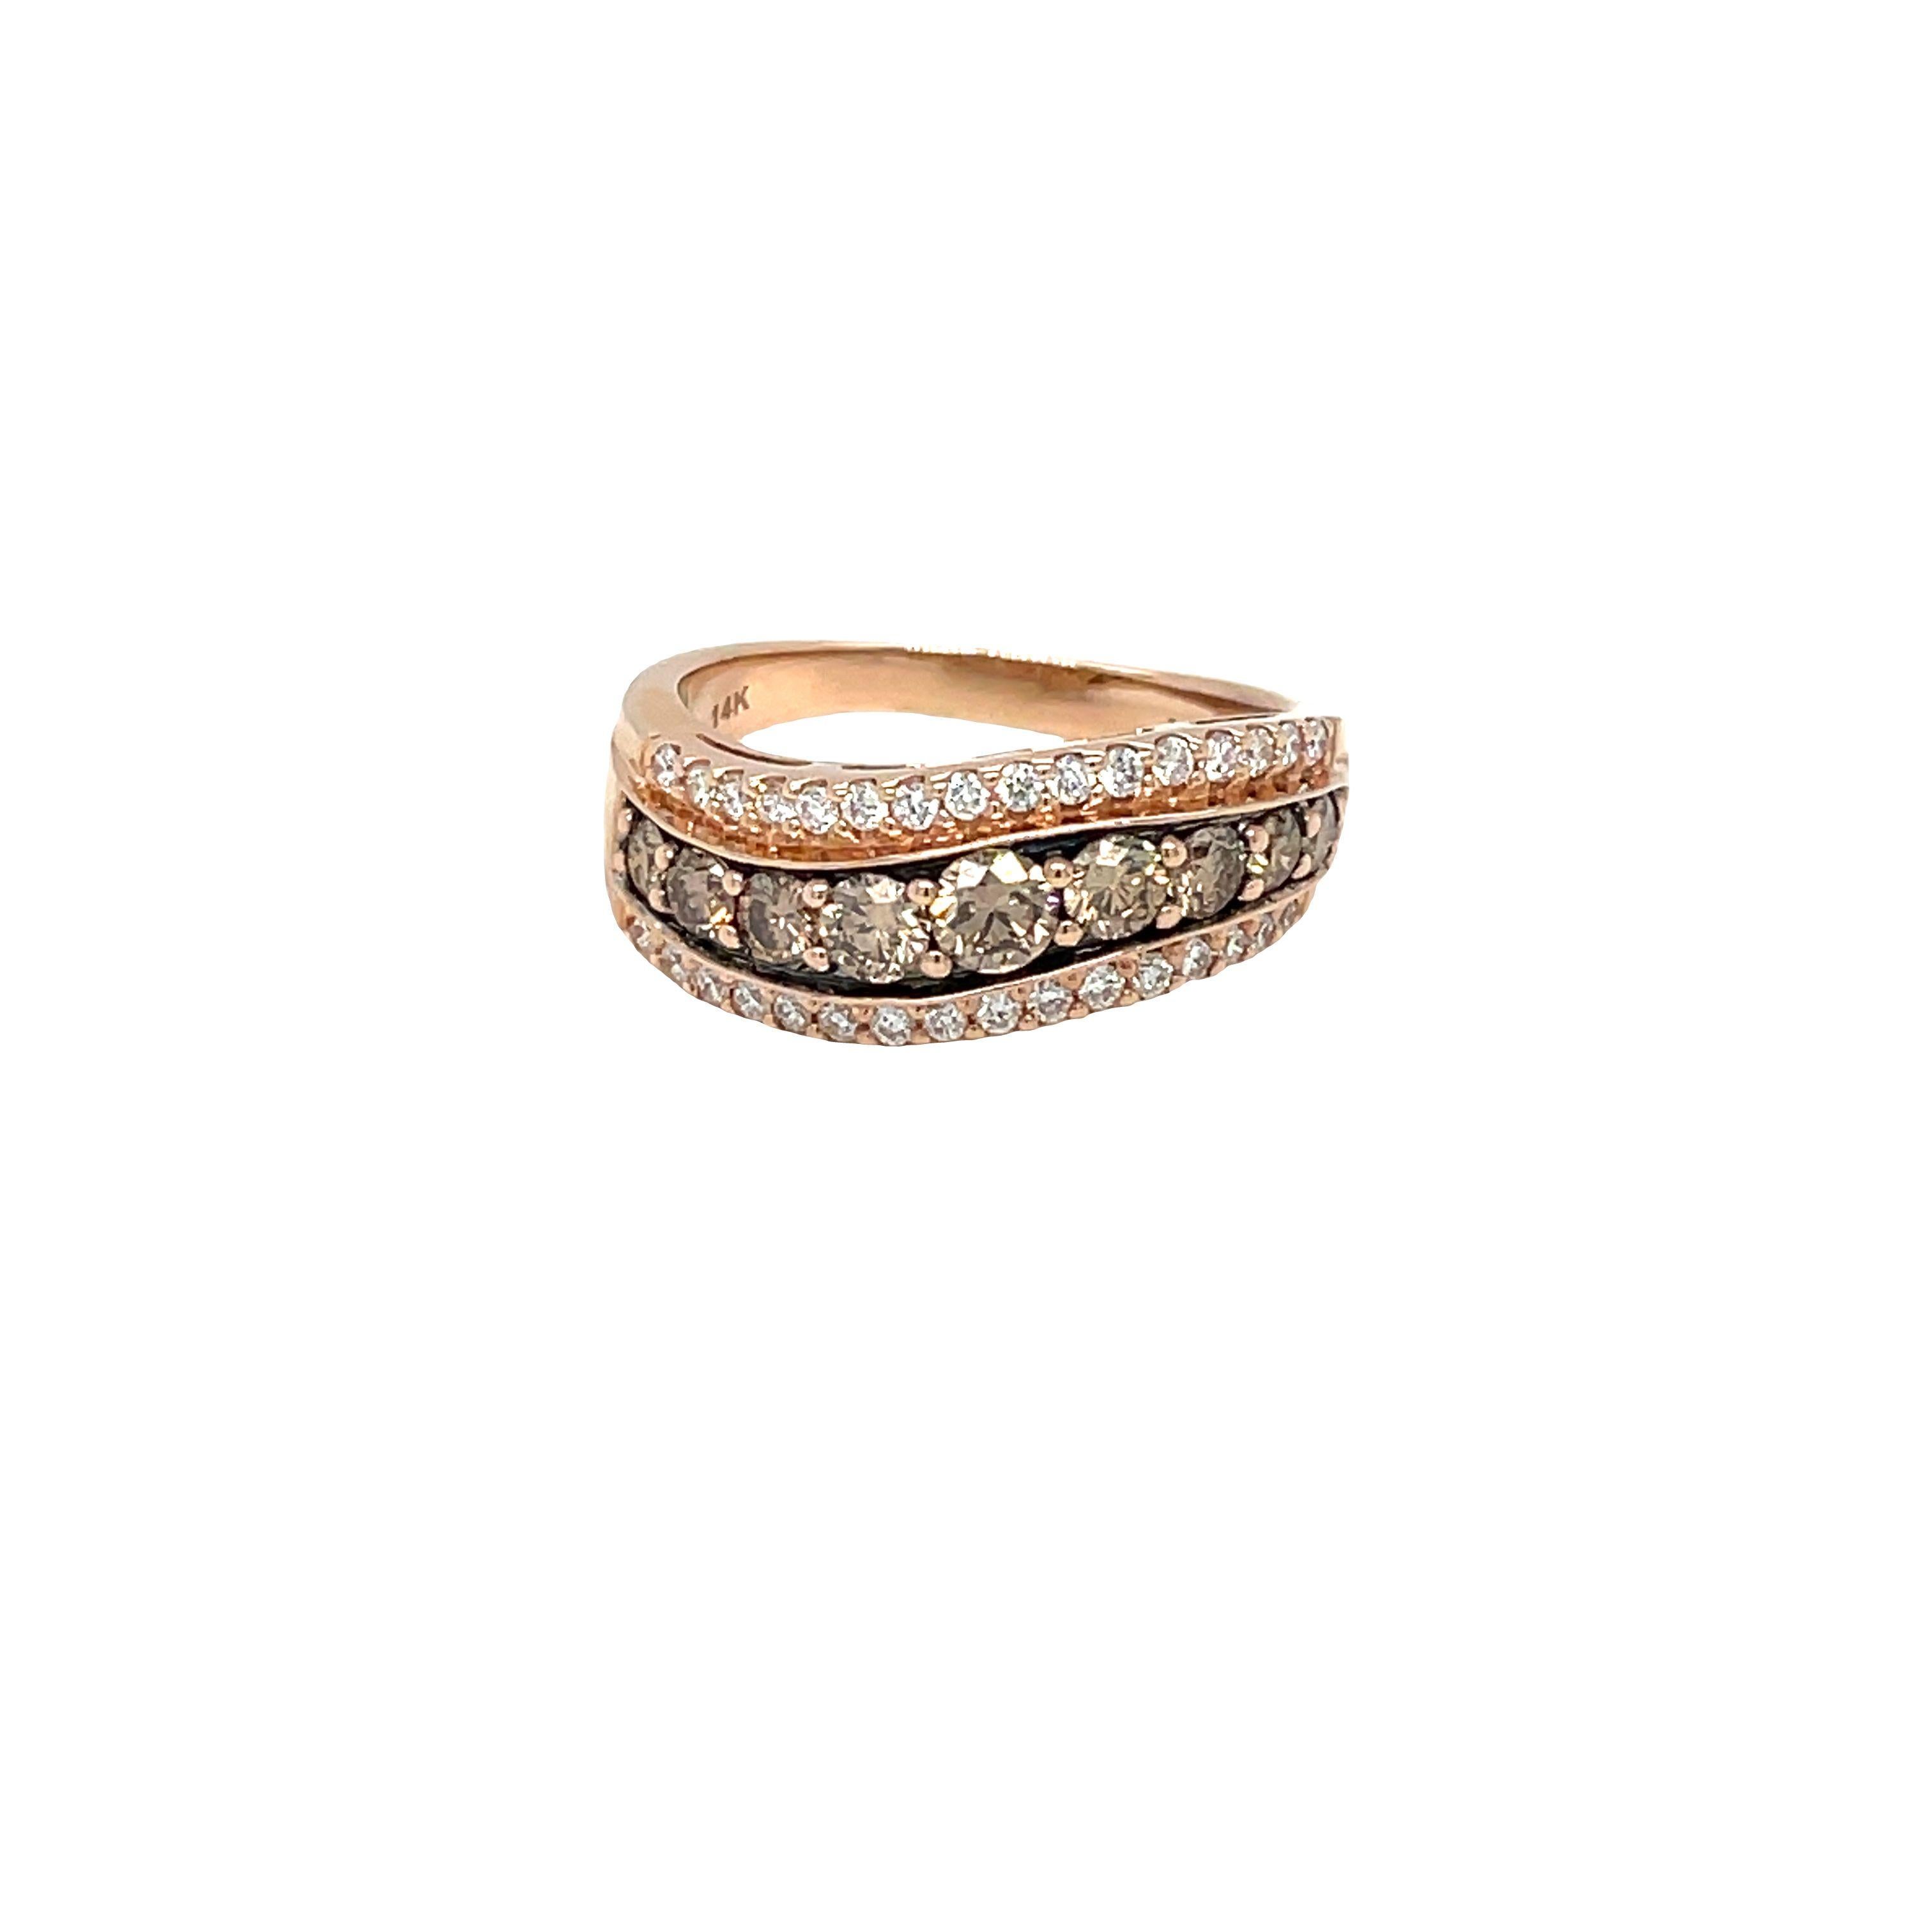 The alternating rows of chocolate and white diamonds create a stunning contrast in color and shine, making this ring a trendy and eye-catching piece. 

Le Vian's chocolate diamond wave ring is a mesmerizing piece that showcases waves of sparkle in